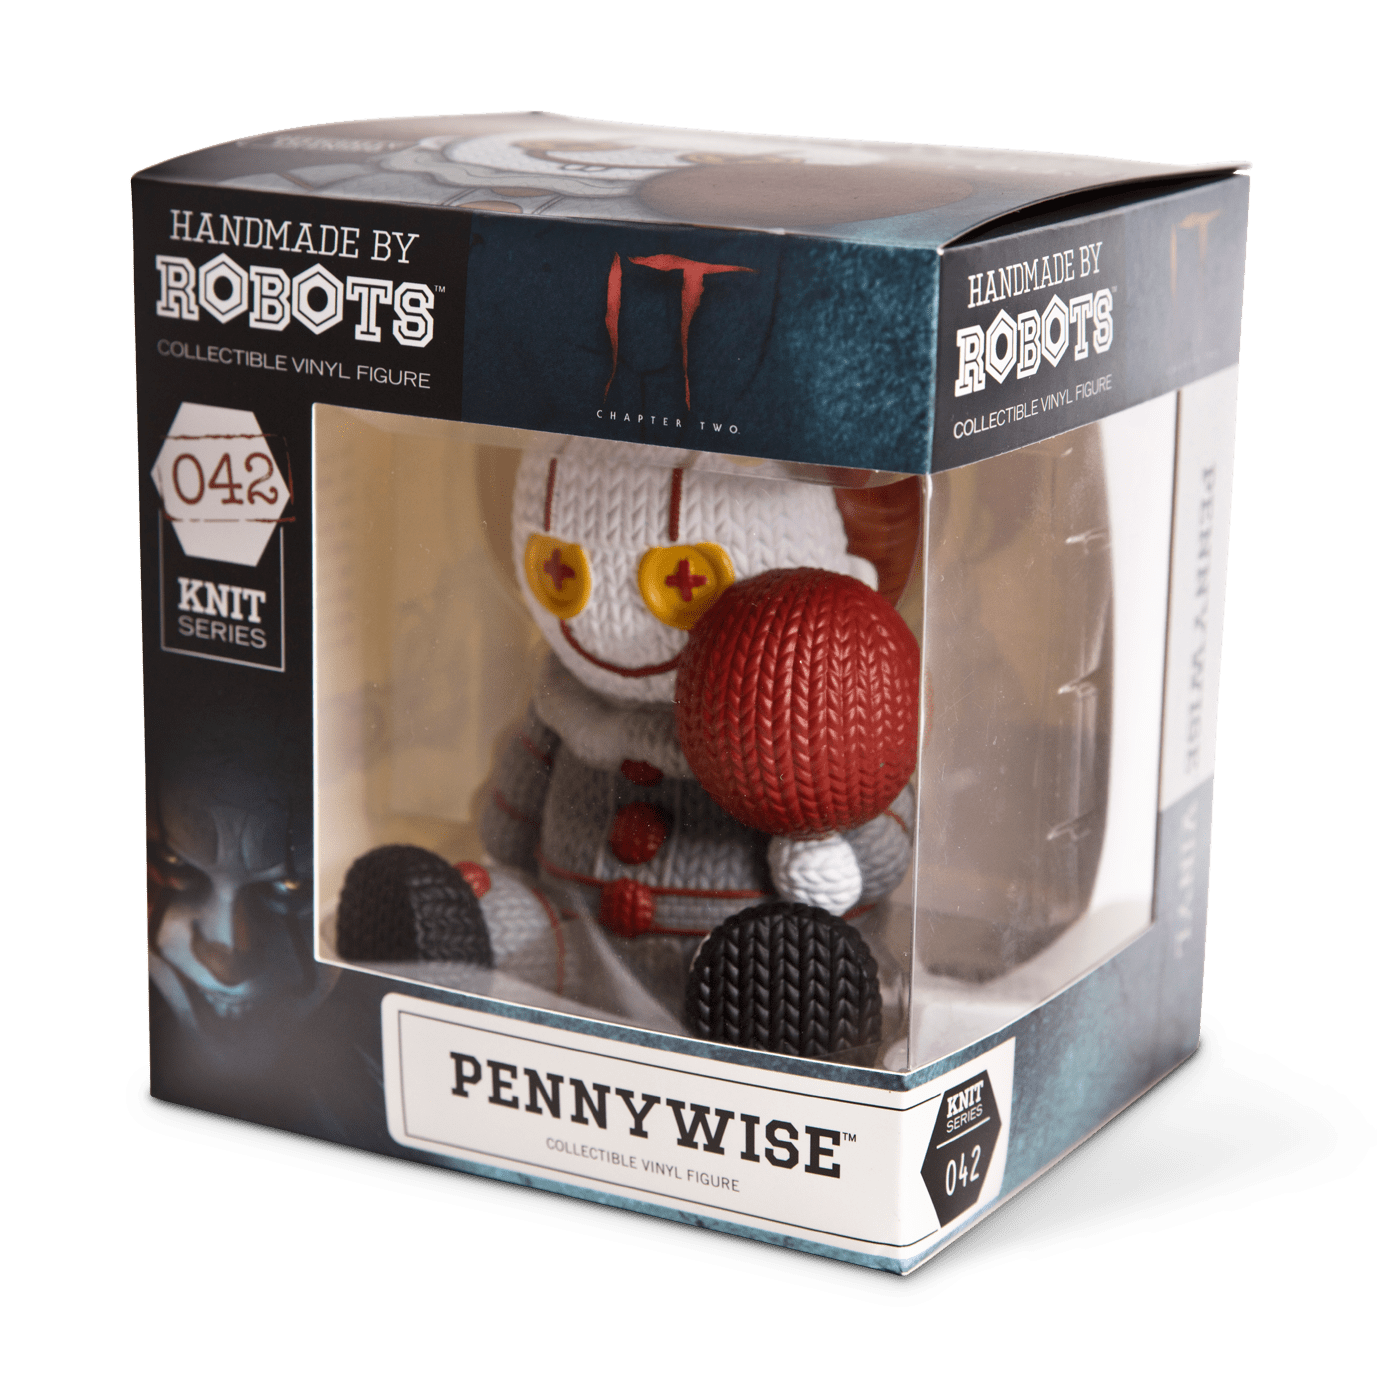 Pennywise Figurine Handmade By Robots Knit